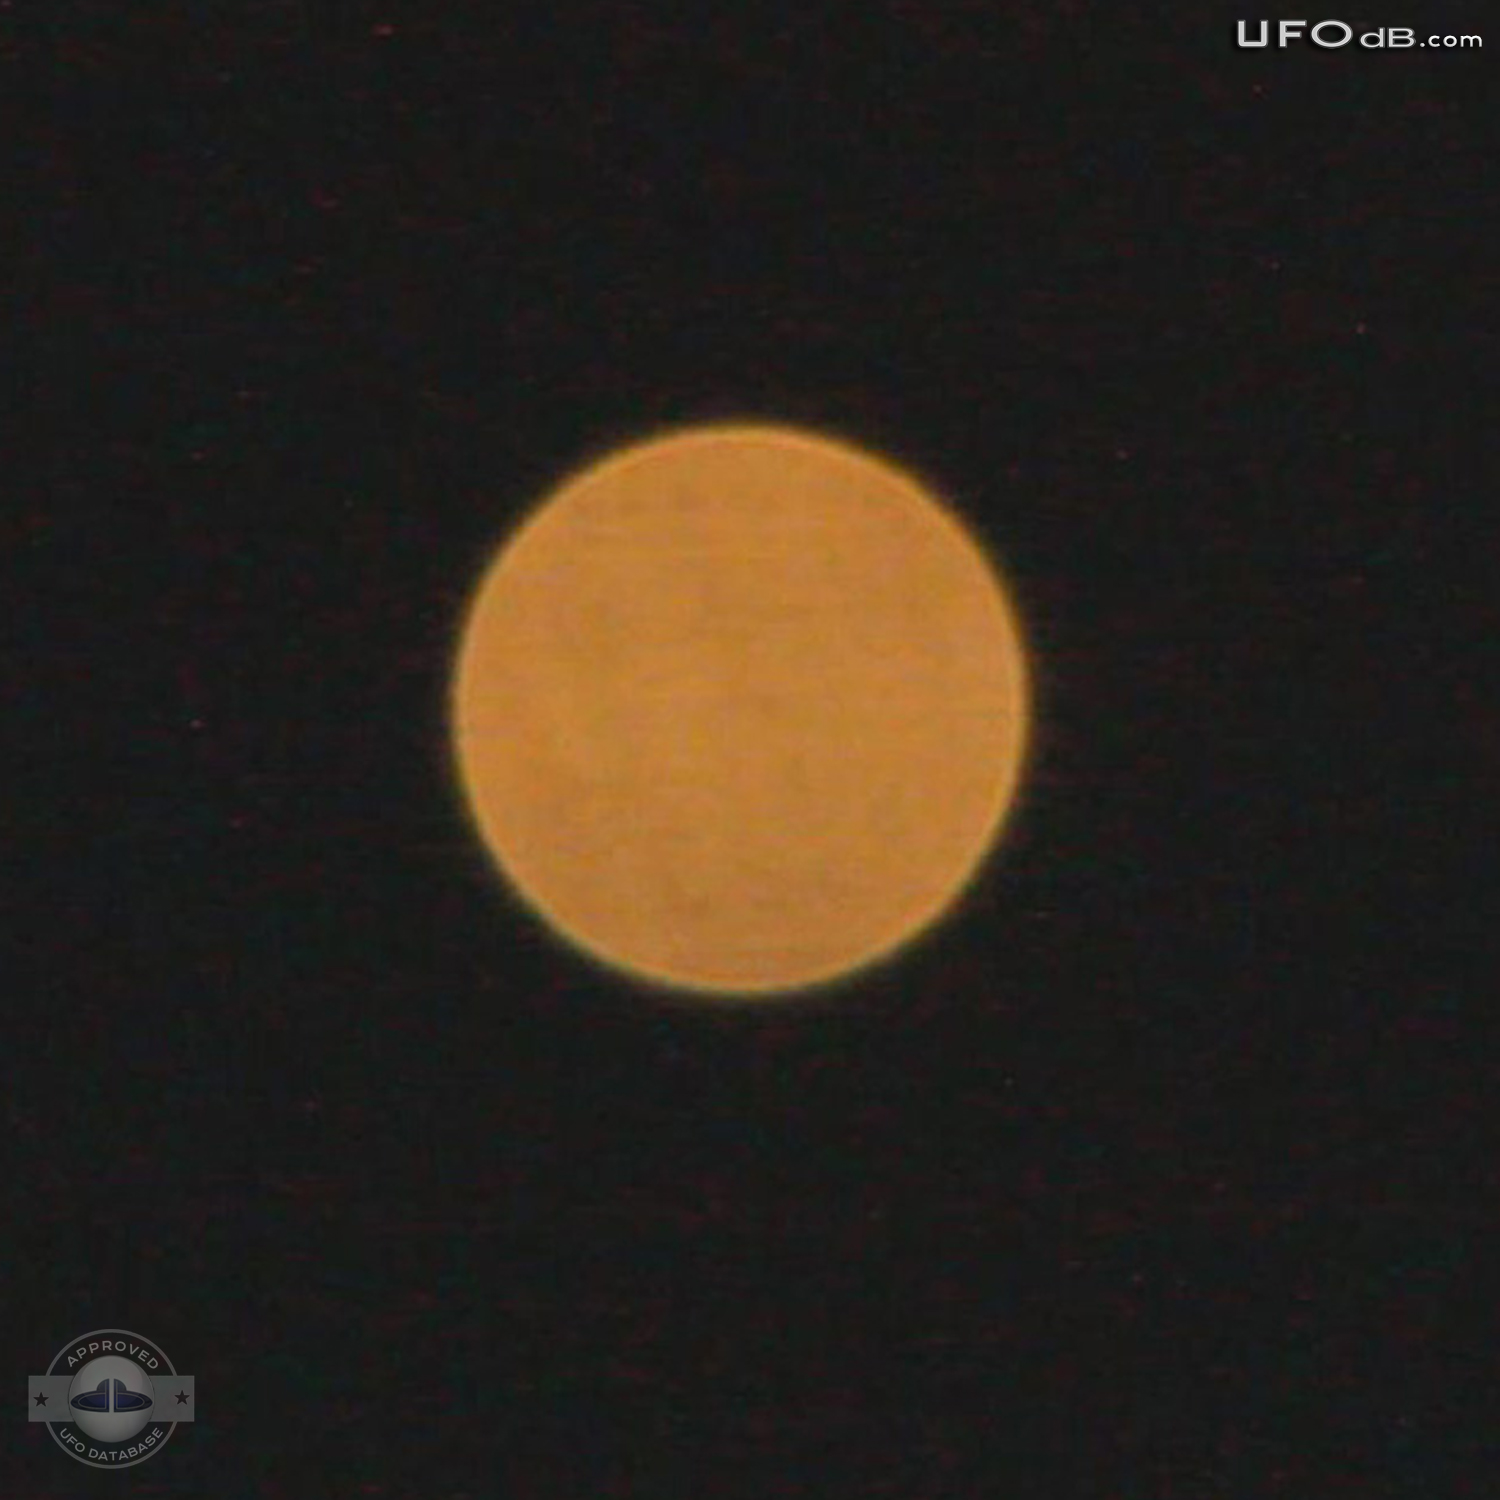 Perfect Orange Sphere UFO in Longueuil, Quebec, Canada | March 20 2011 UFO Picture #316-3